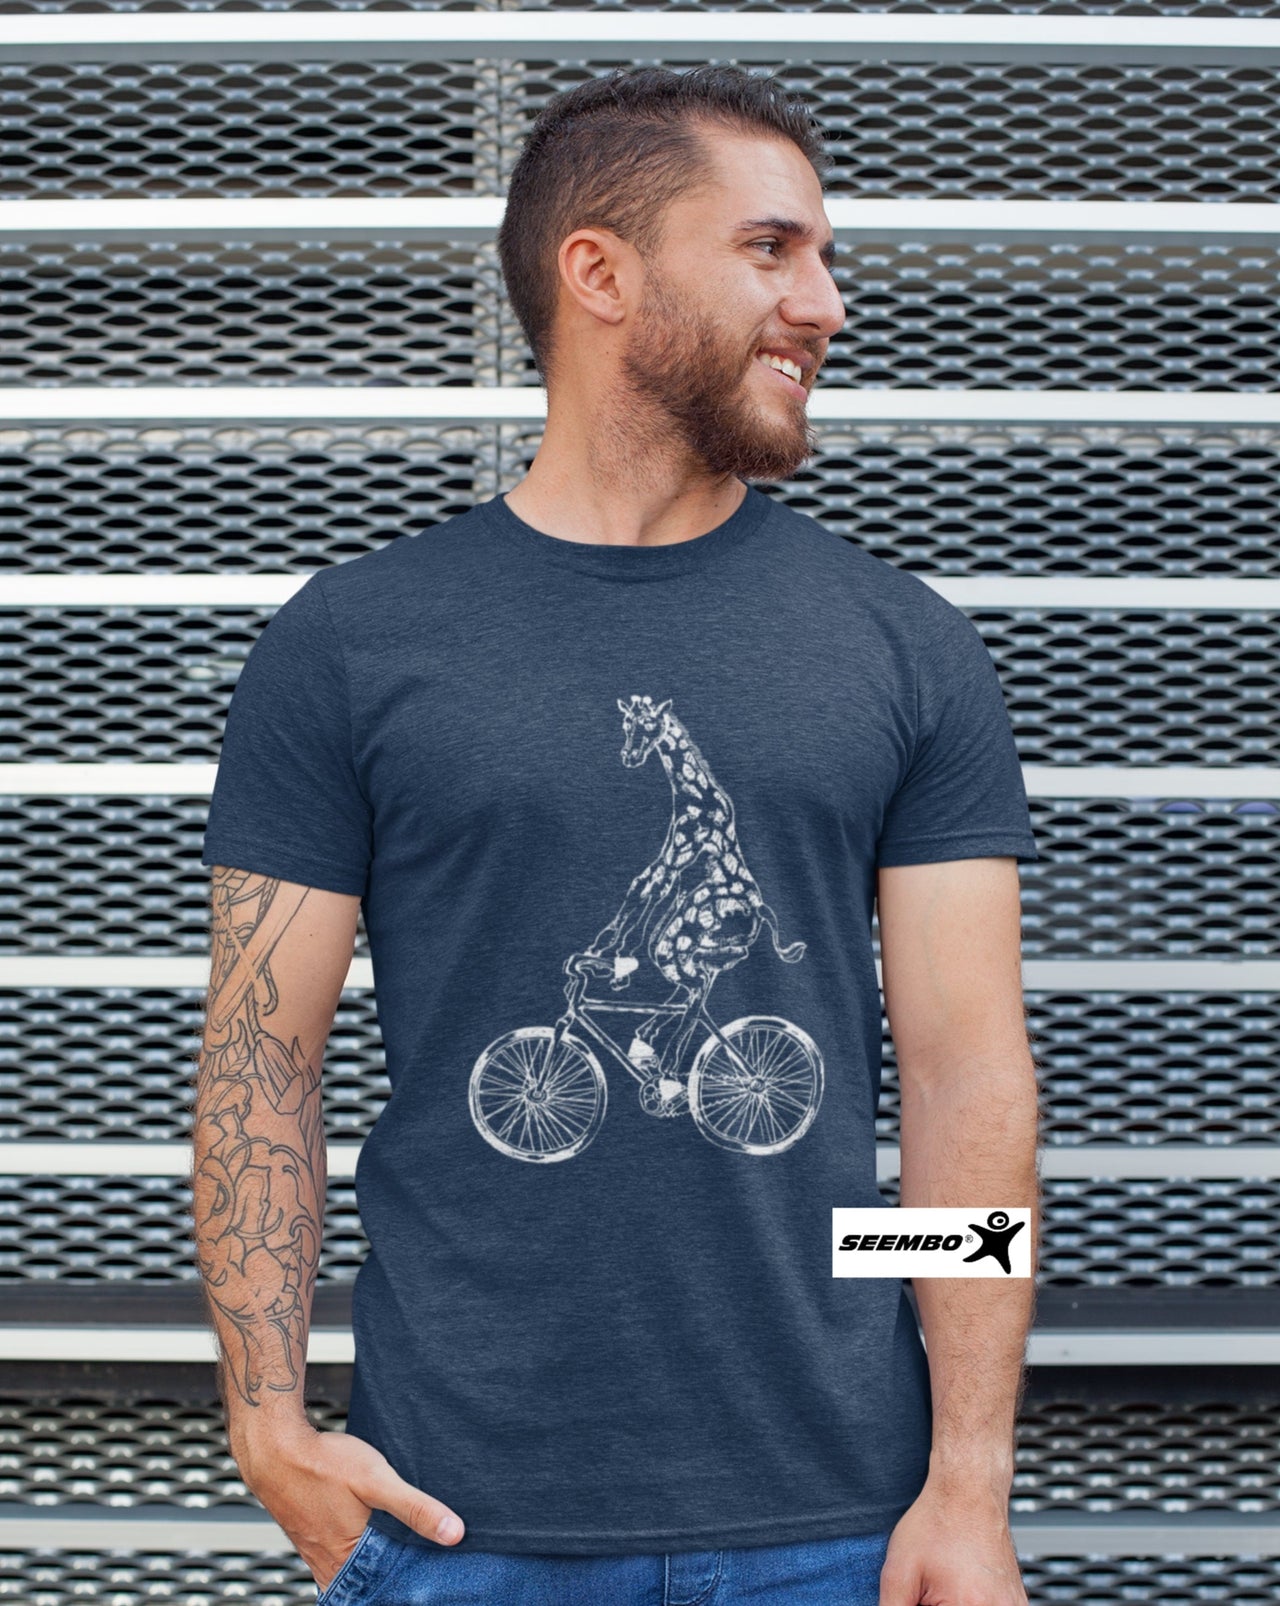 a-man-with-seembo-giraffe-cycling-bicycle-bike-design-on-it-vintage-navy-t-shirt